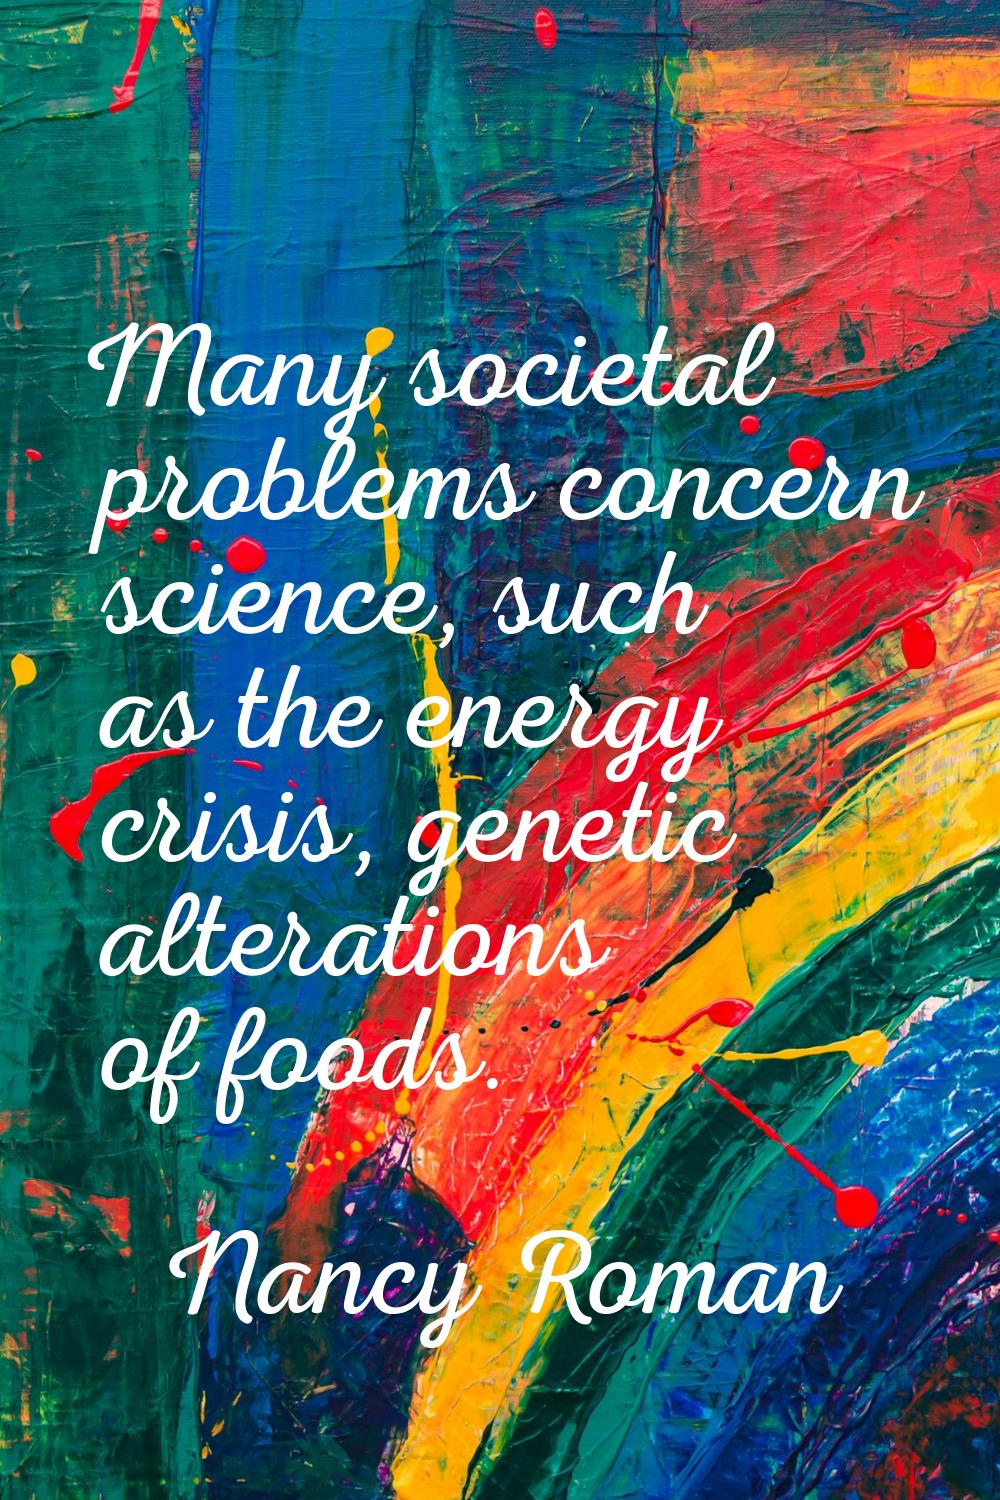 Many societal problems concern science, such as the energy crisis, genetic alterations of foods.